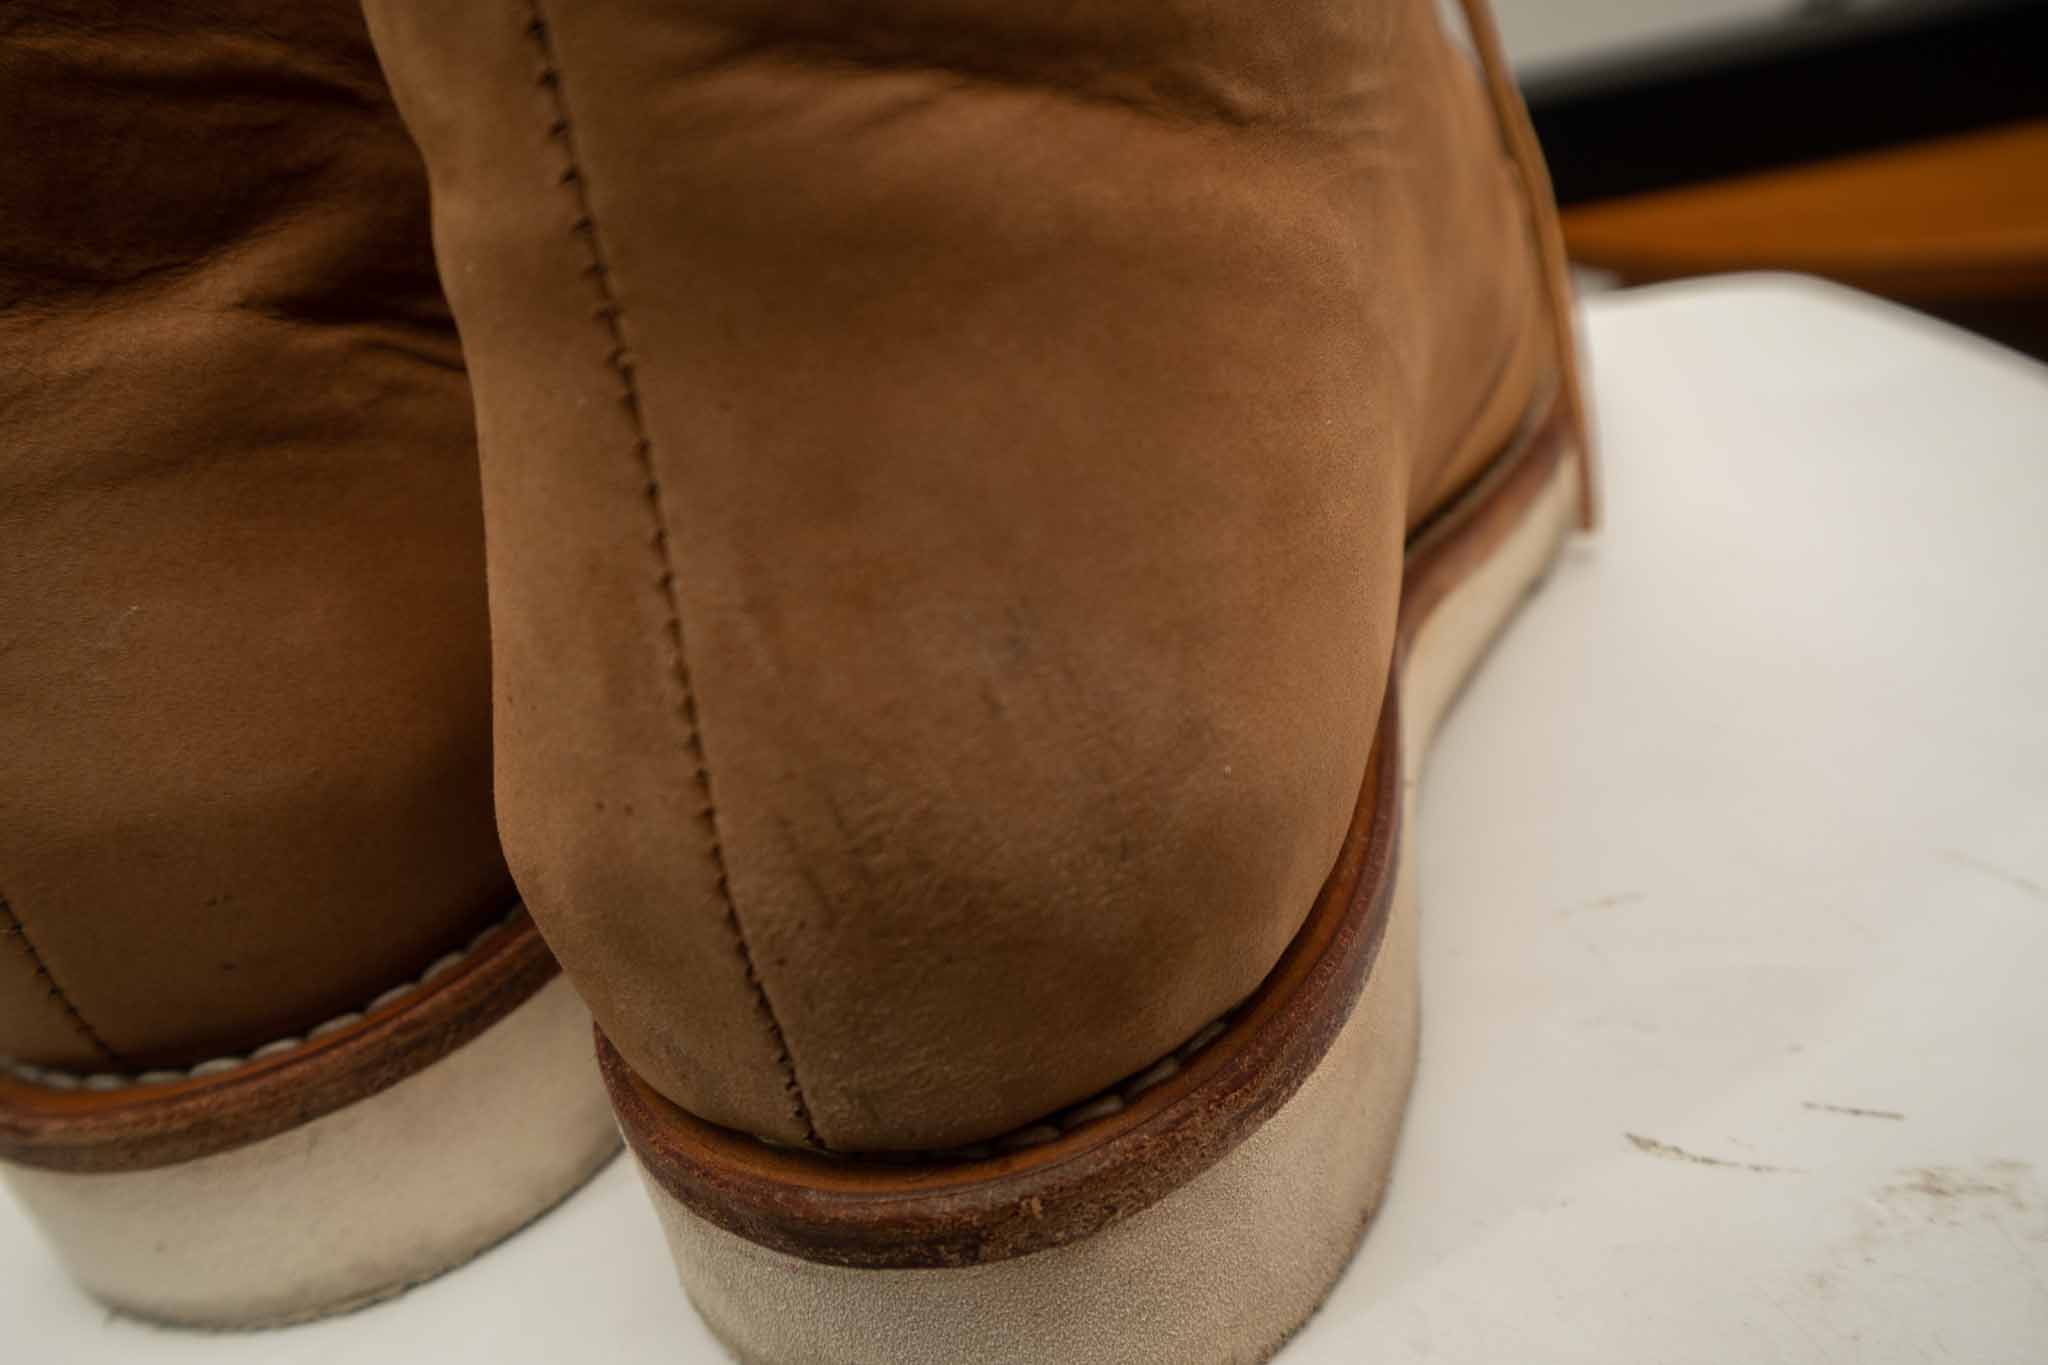 showing scratch marks on leather boot